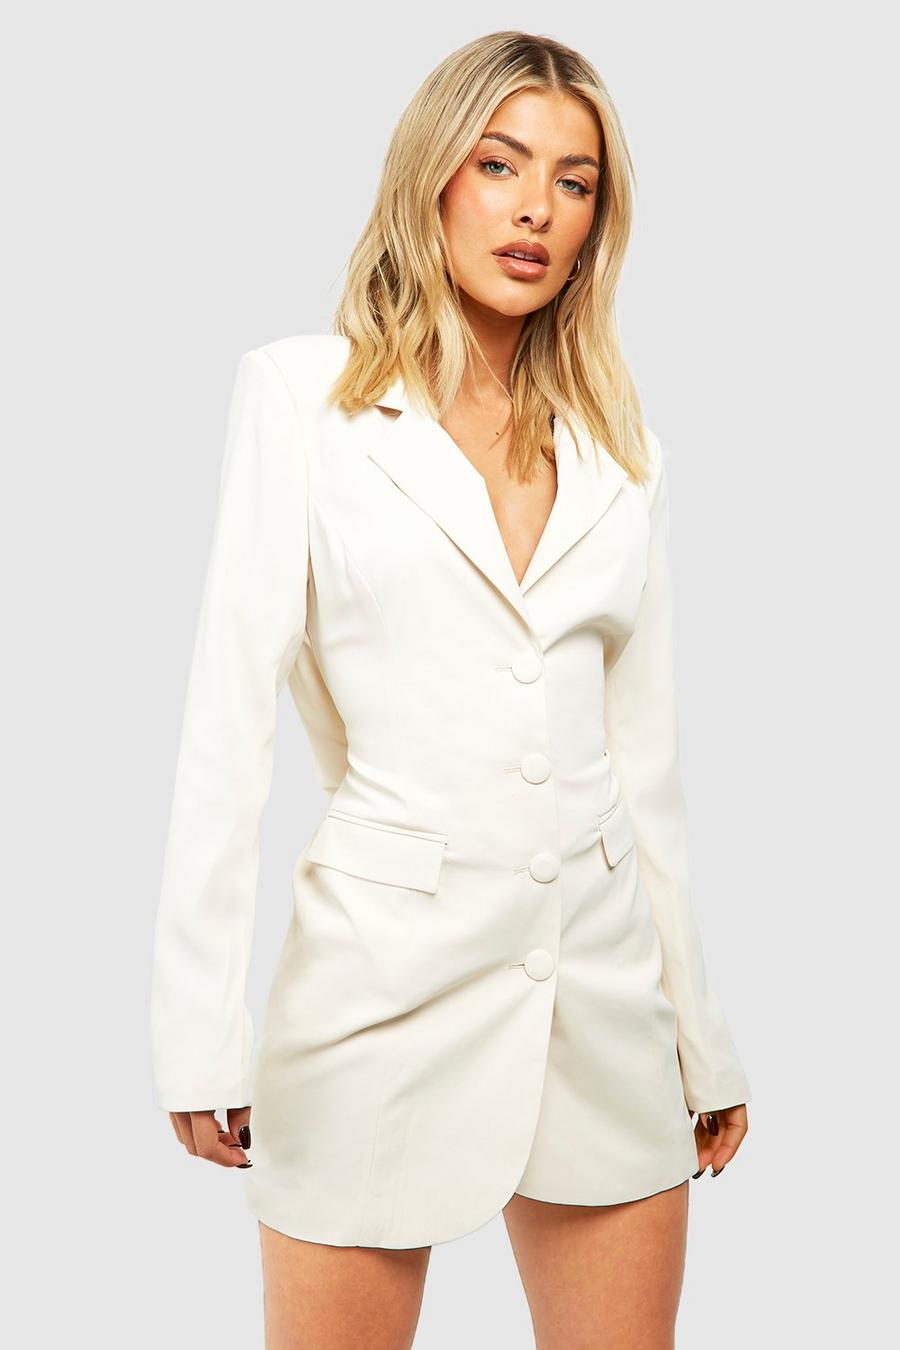 Cream Tailored Low Cowl Back Fitted Blazer Dress